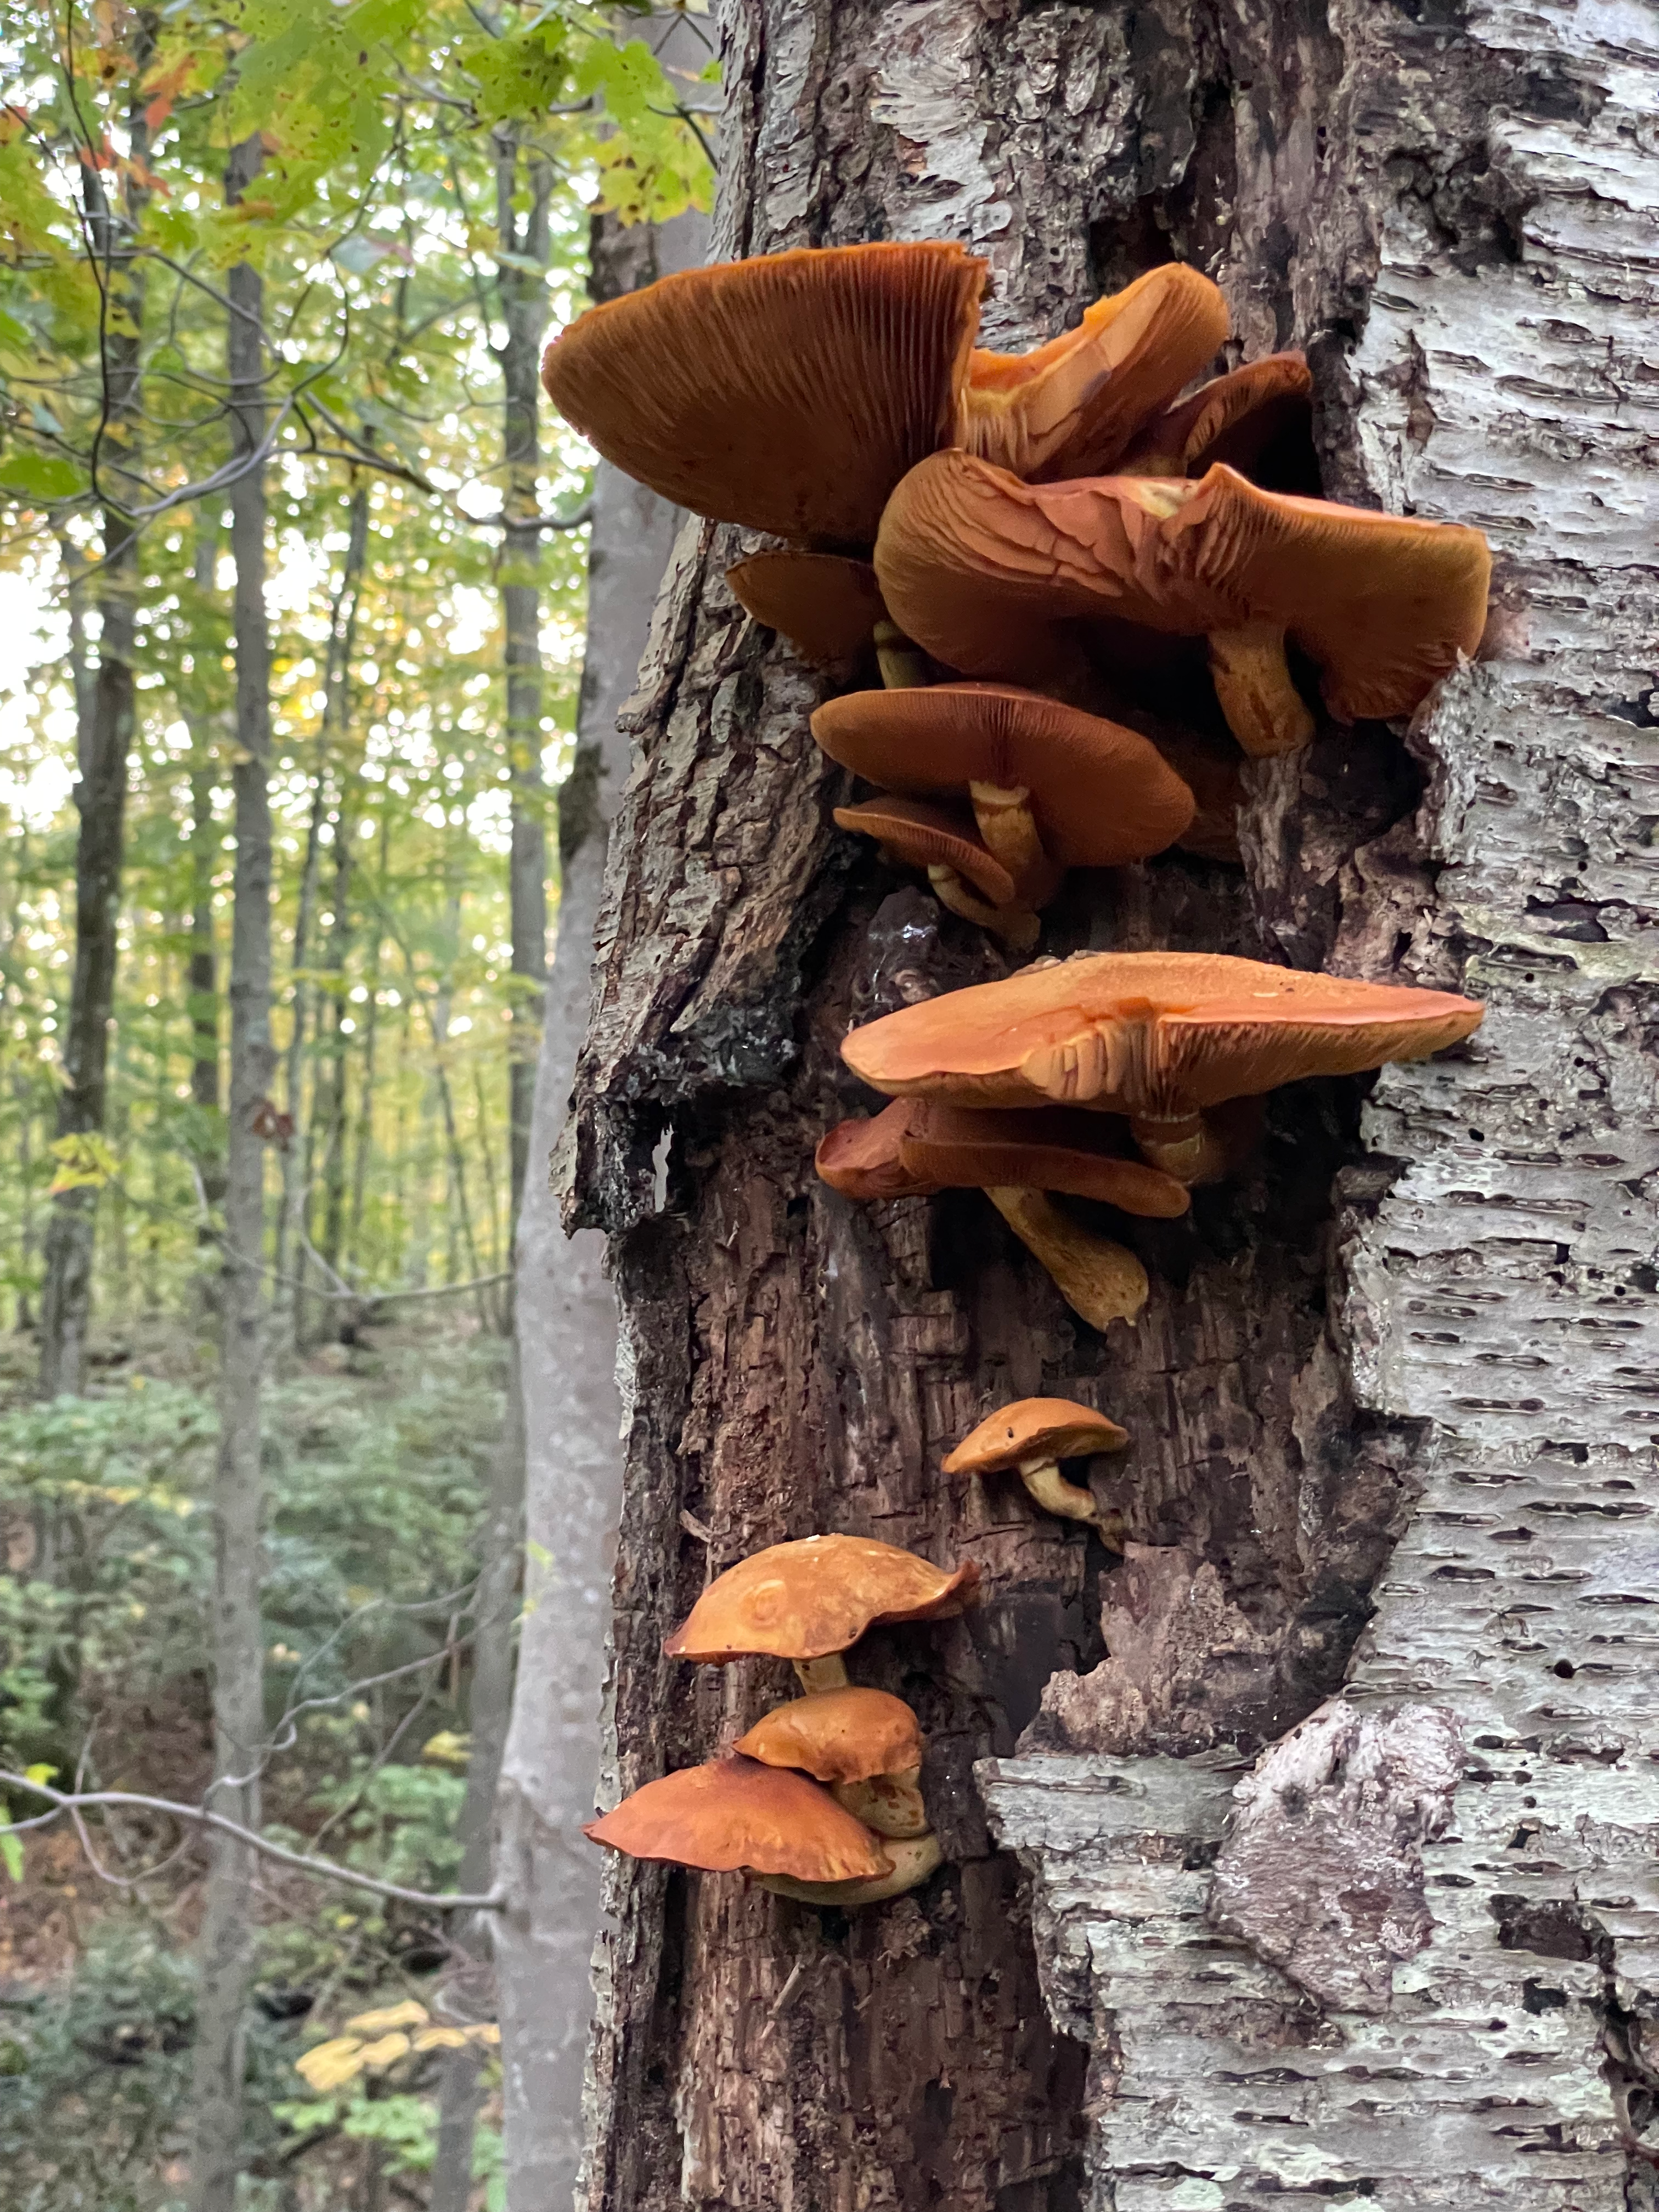 A lovely mushroom growth in Connecticut, October 2021. 📸  by Kristen.